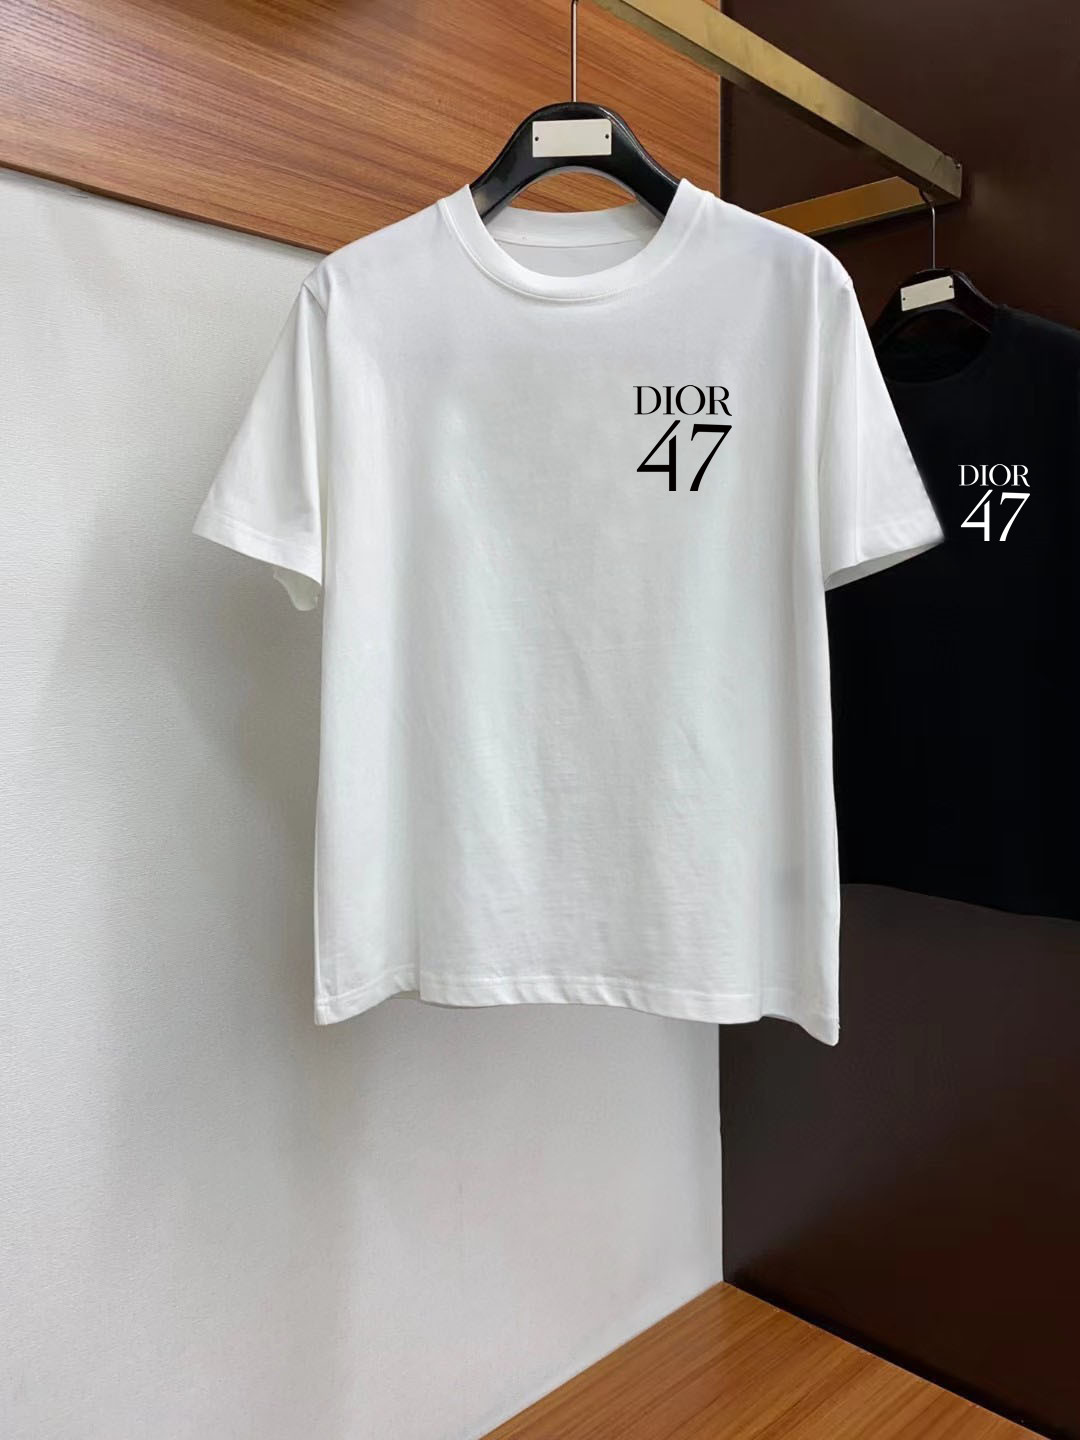 How to find replica Shop
 Dior Clothing T-Shirt Black White Cotton Spring/Summer Collection Short Sleeve